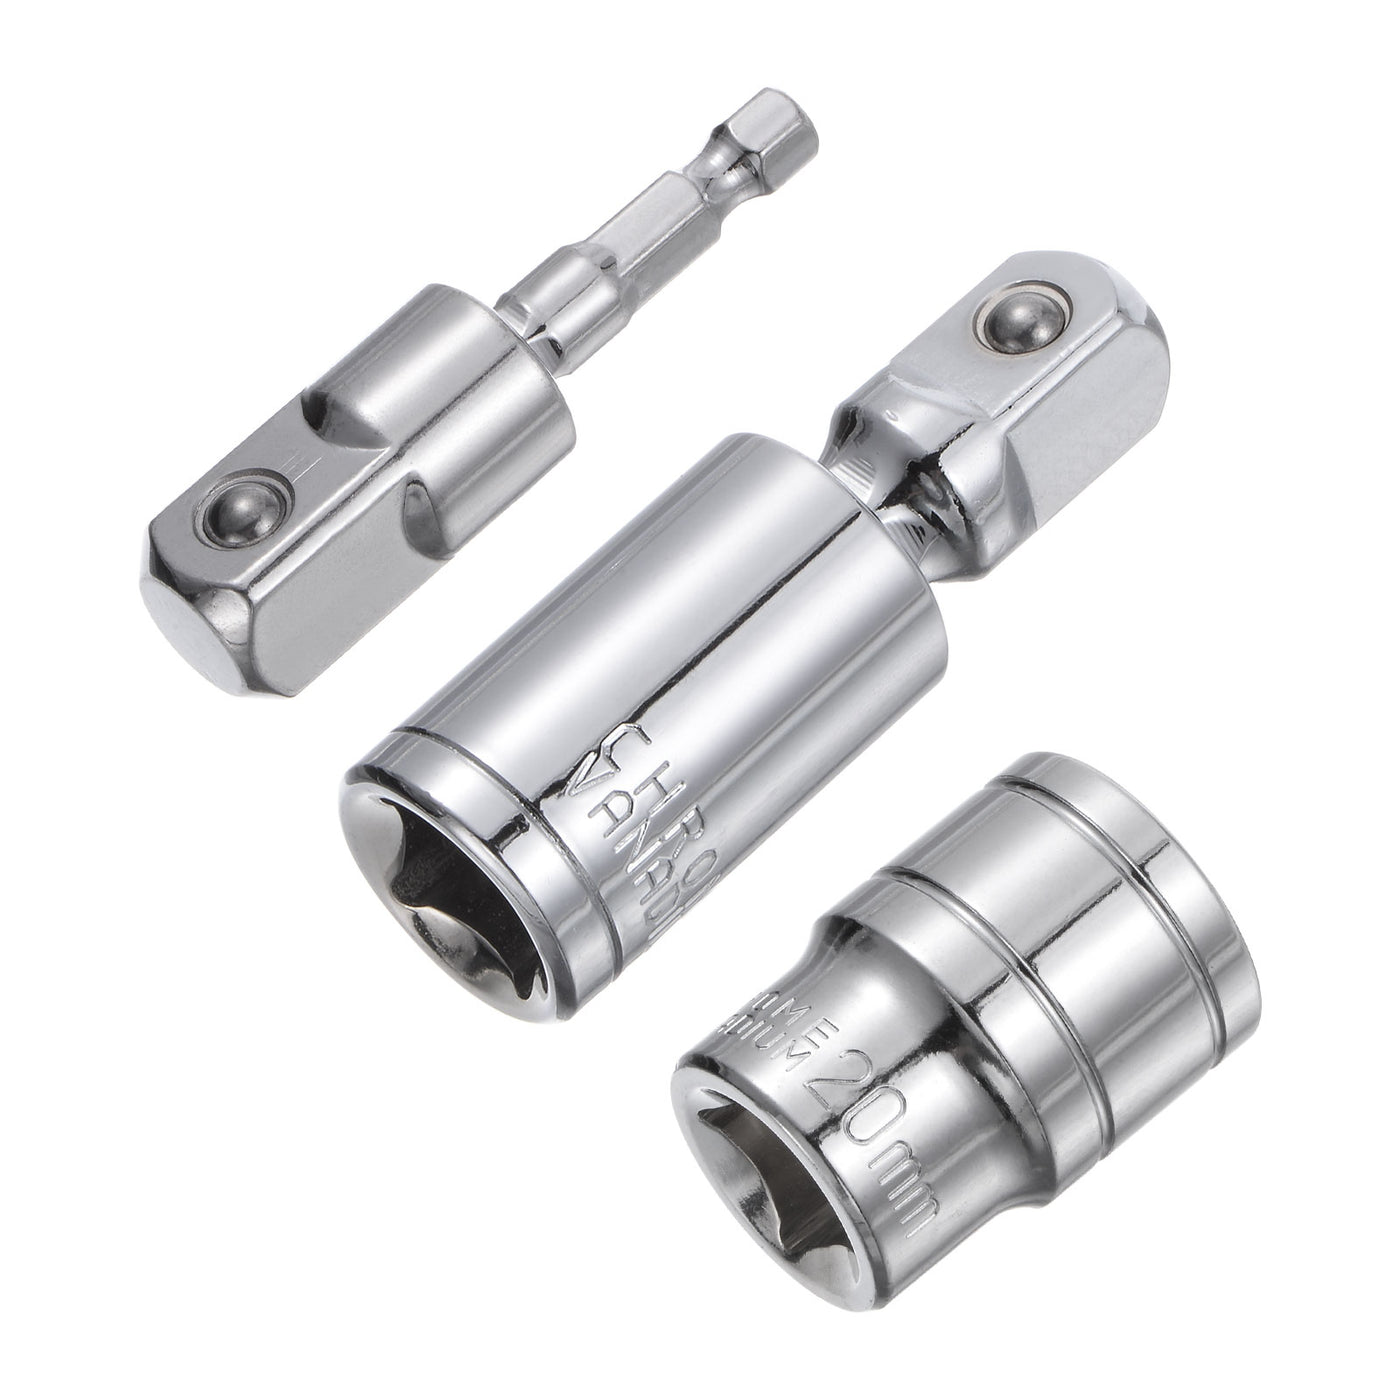 uxcell Uxcell 1/2" Drive 20mm Shallow Socket Swivel Joints Hex Shank Impact Driver Adaptor Set